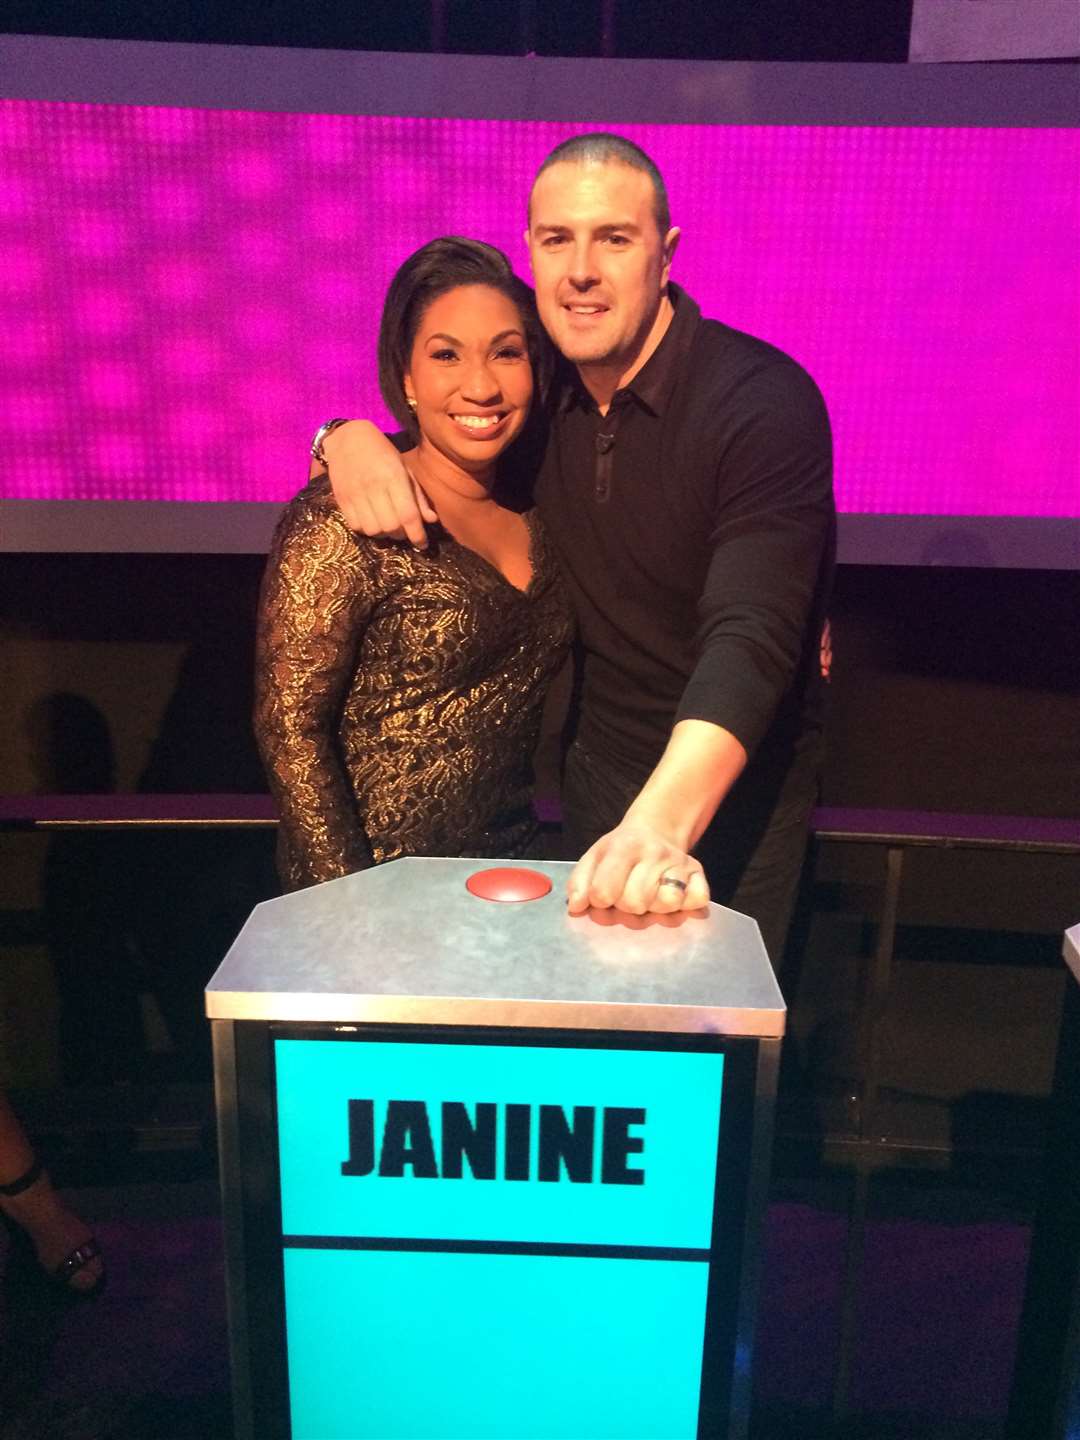 Janine Mars on Take Me Out with presenter Paddy McGuinness.